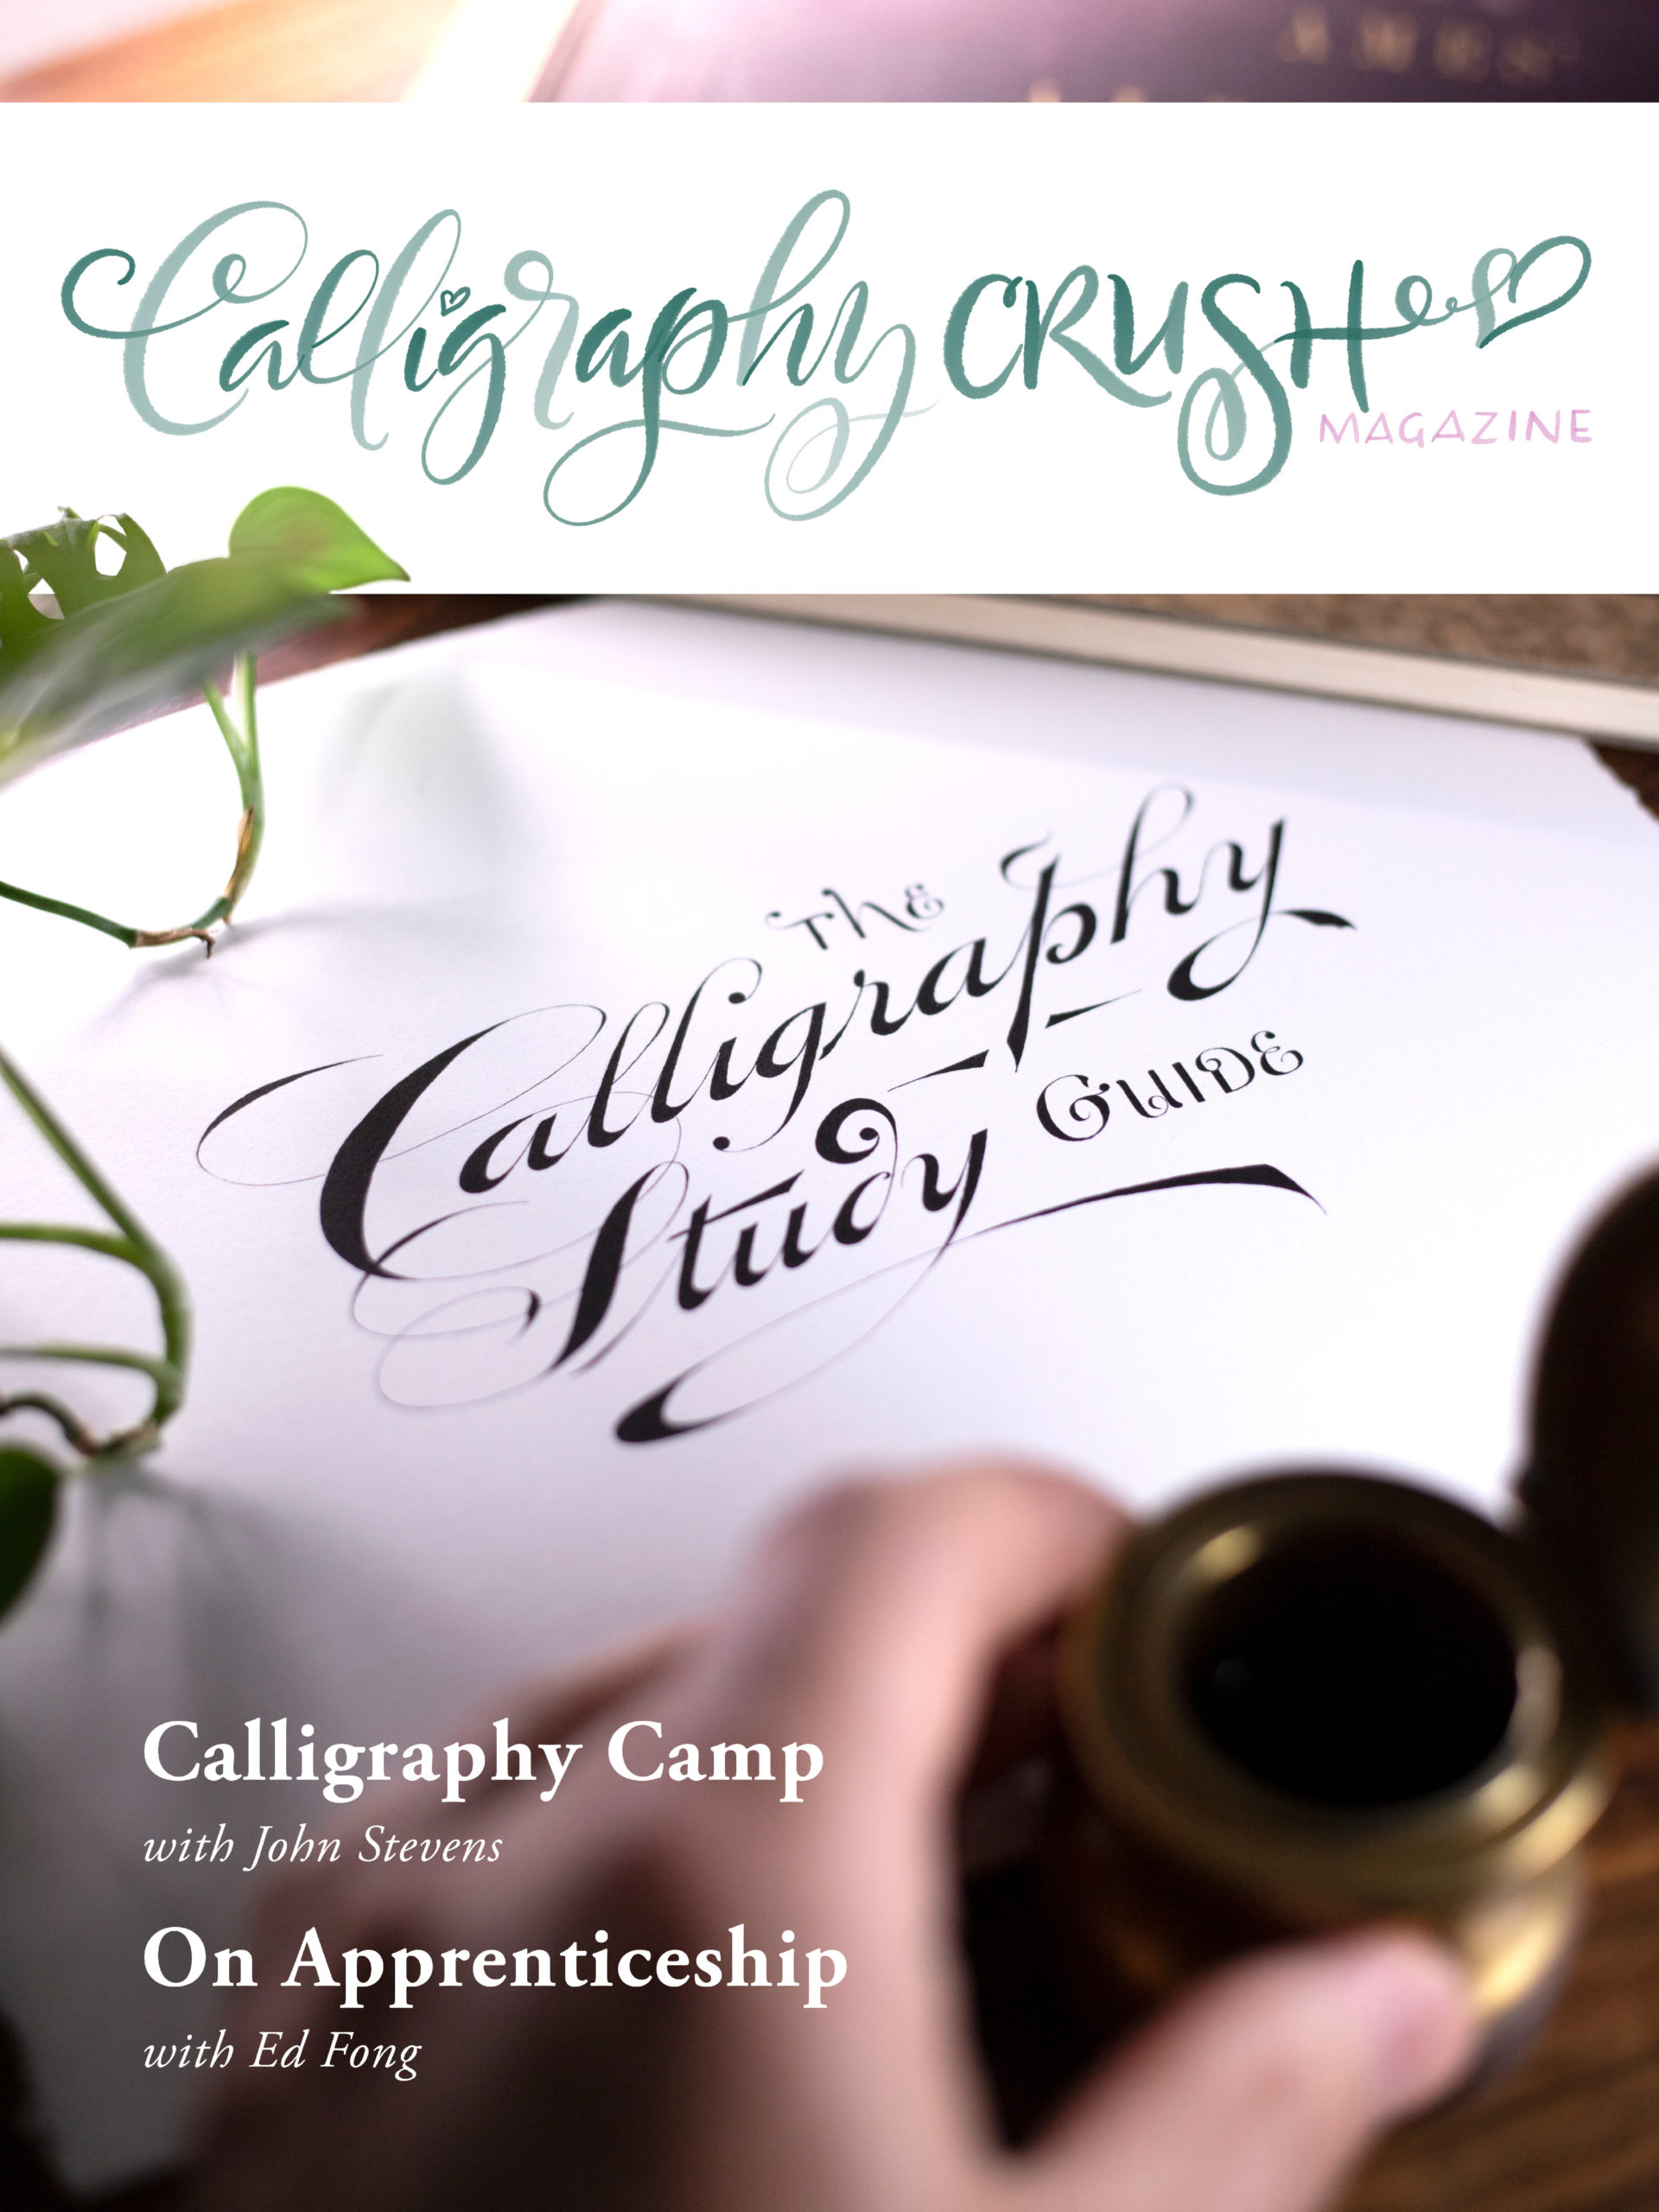 Issue 4 - The Calligraphy Study Guide - Calligraphy Crush Magazine